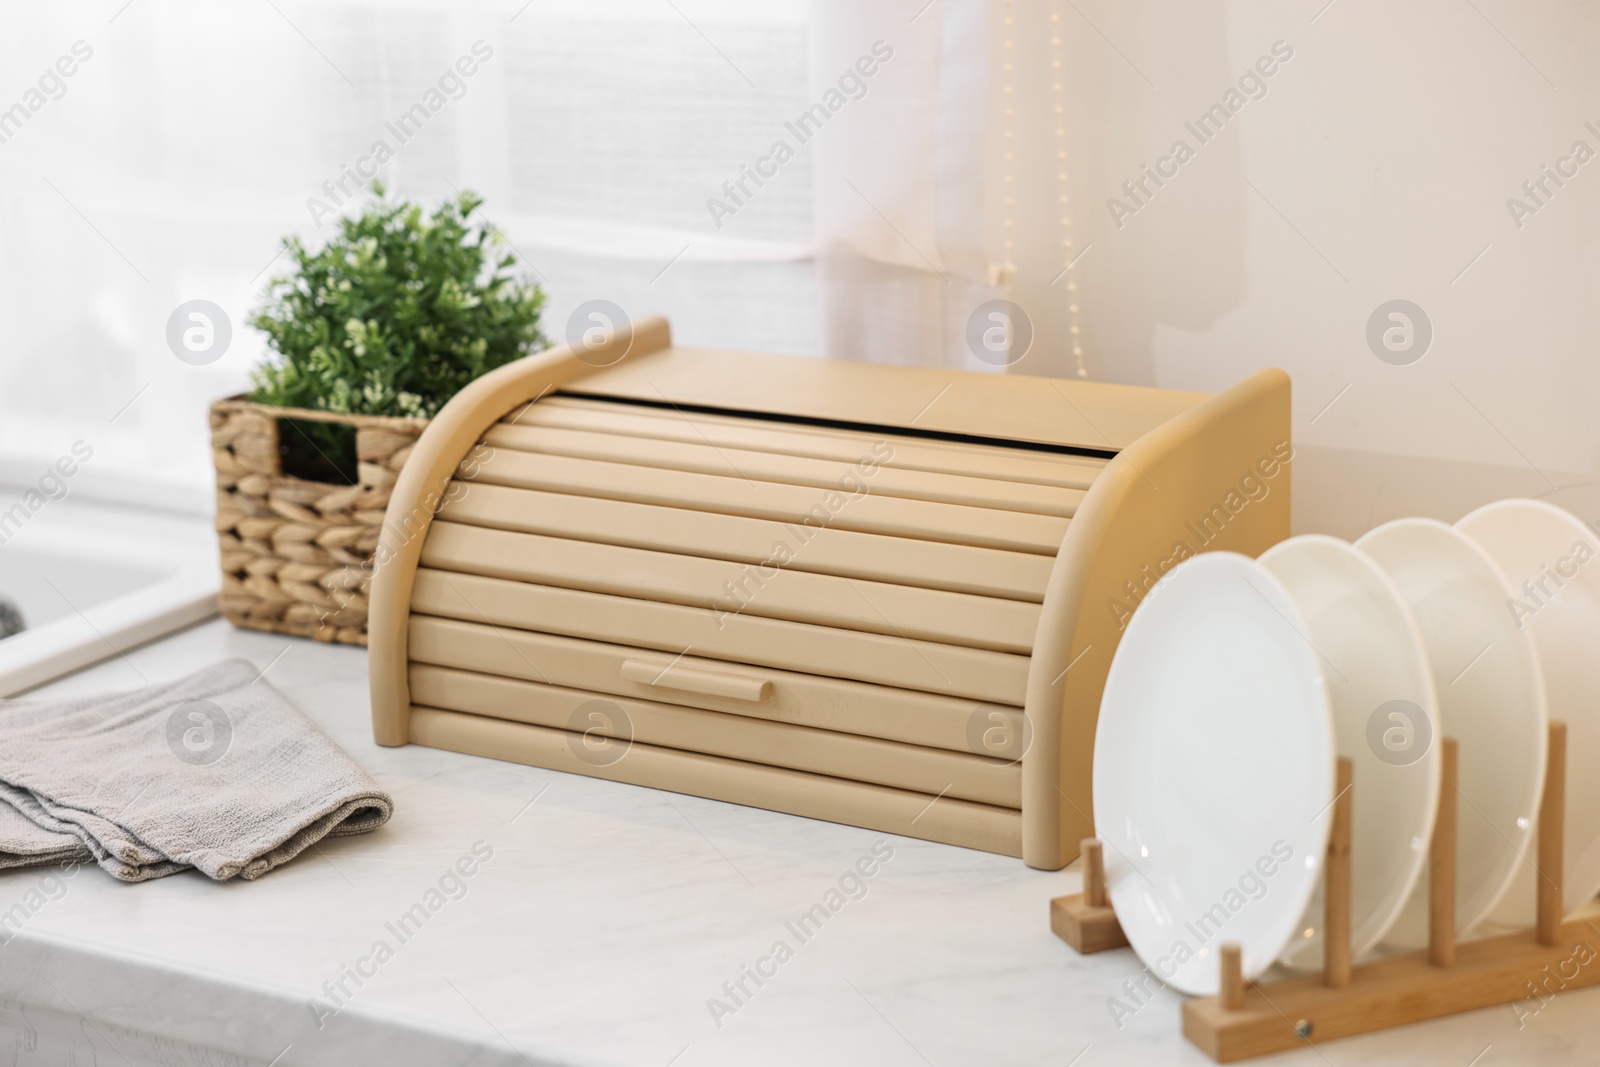 Photo of Wooden bread box, houseplant and plates on white marble countertop in kitchen